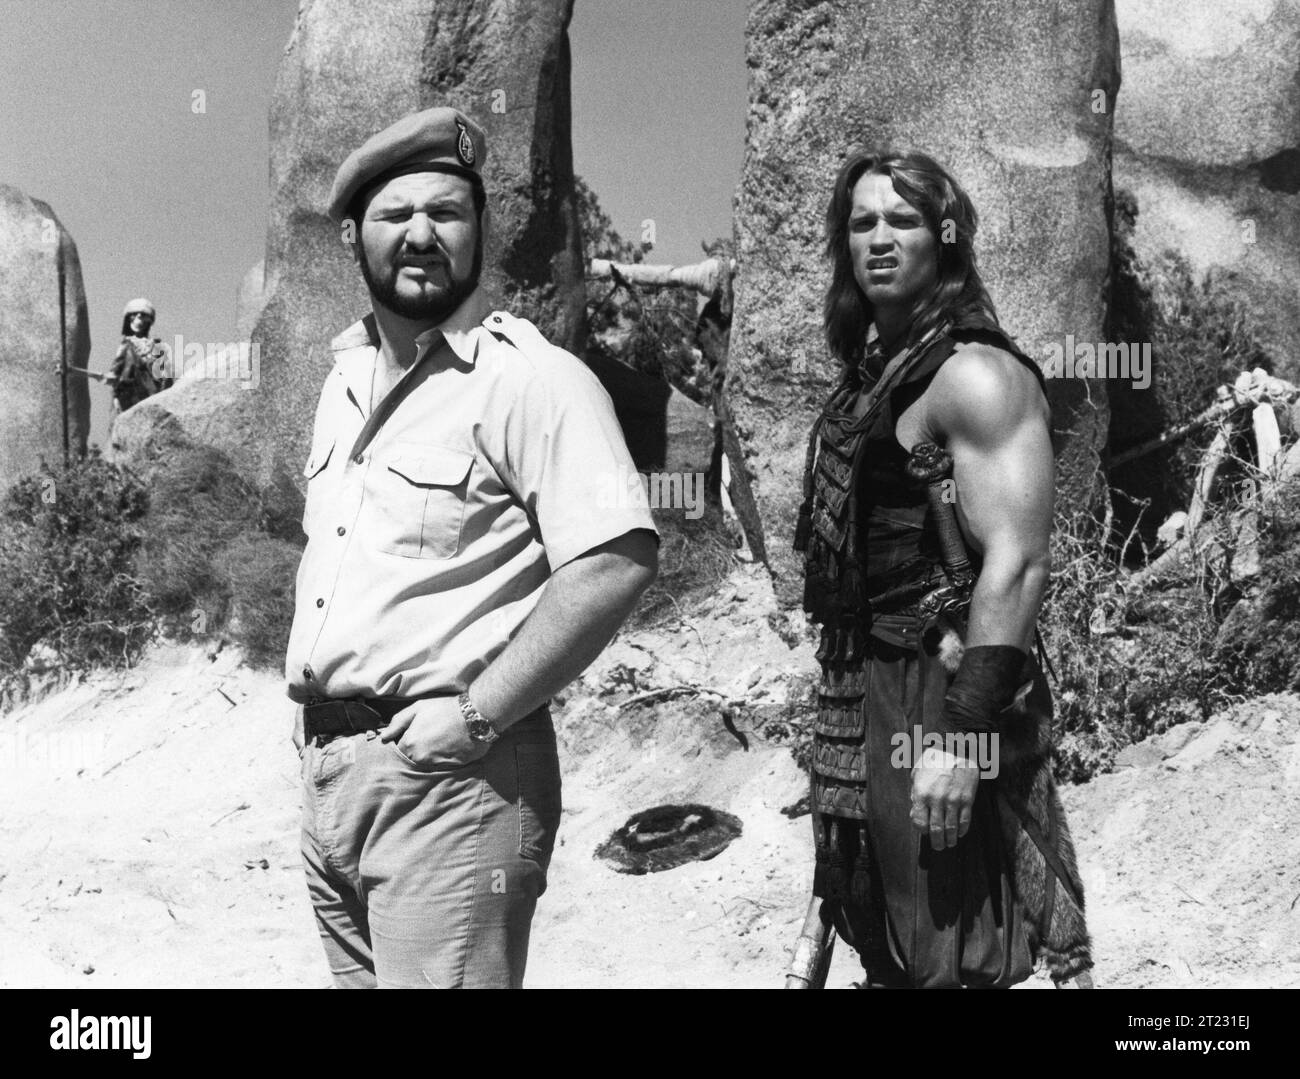 Director JOHN MILIUS and ARNOLD SCHWARZENEGGER on the set of CONAN THE BARBARIAN 1982  Character created by ROBERT E> HOWARD Costume Design JOHN BLOOMFIELD Music BASIL POLEDOURIS Universal Pictures Stock Photo